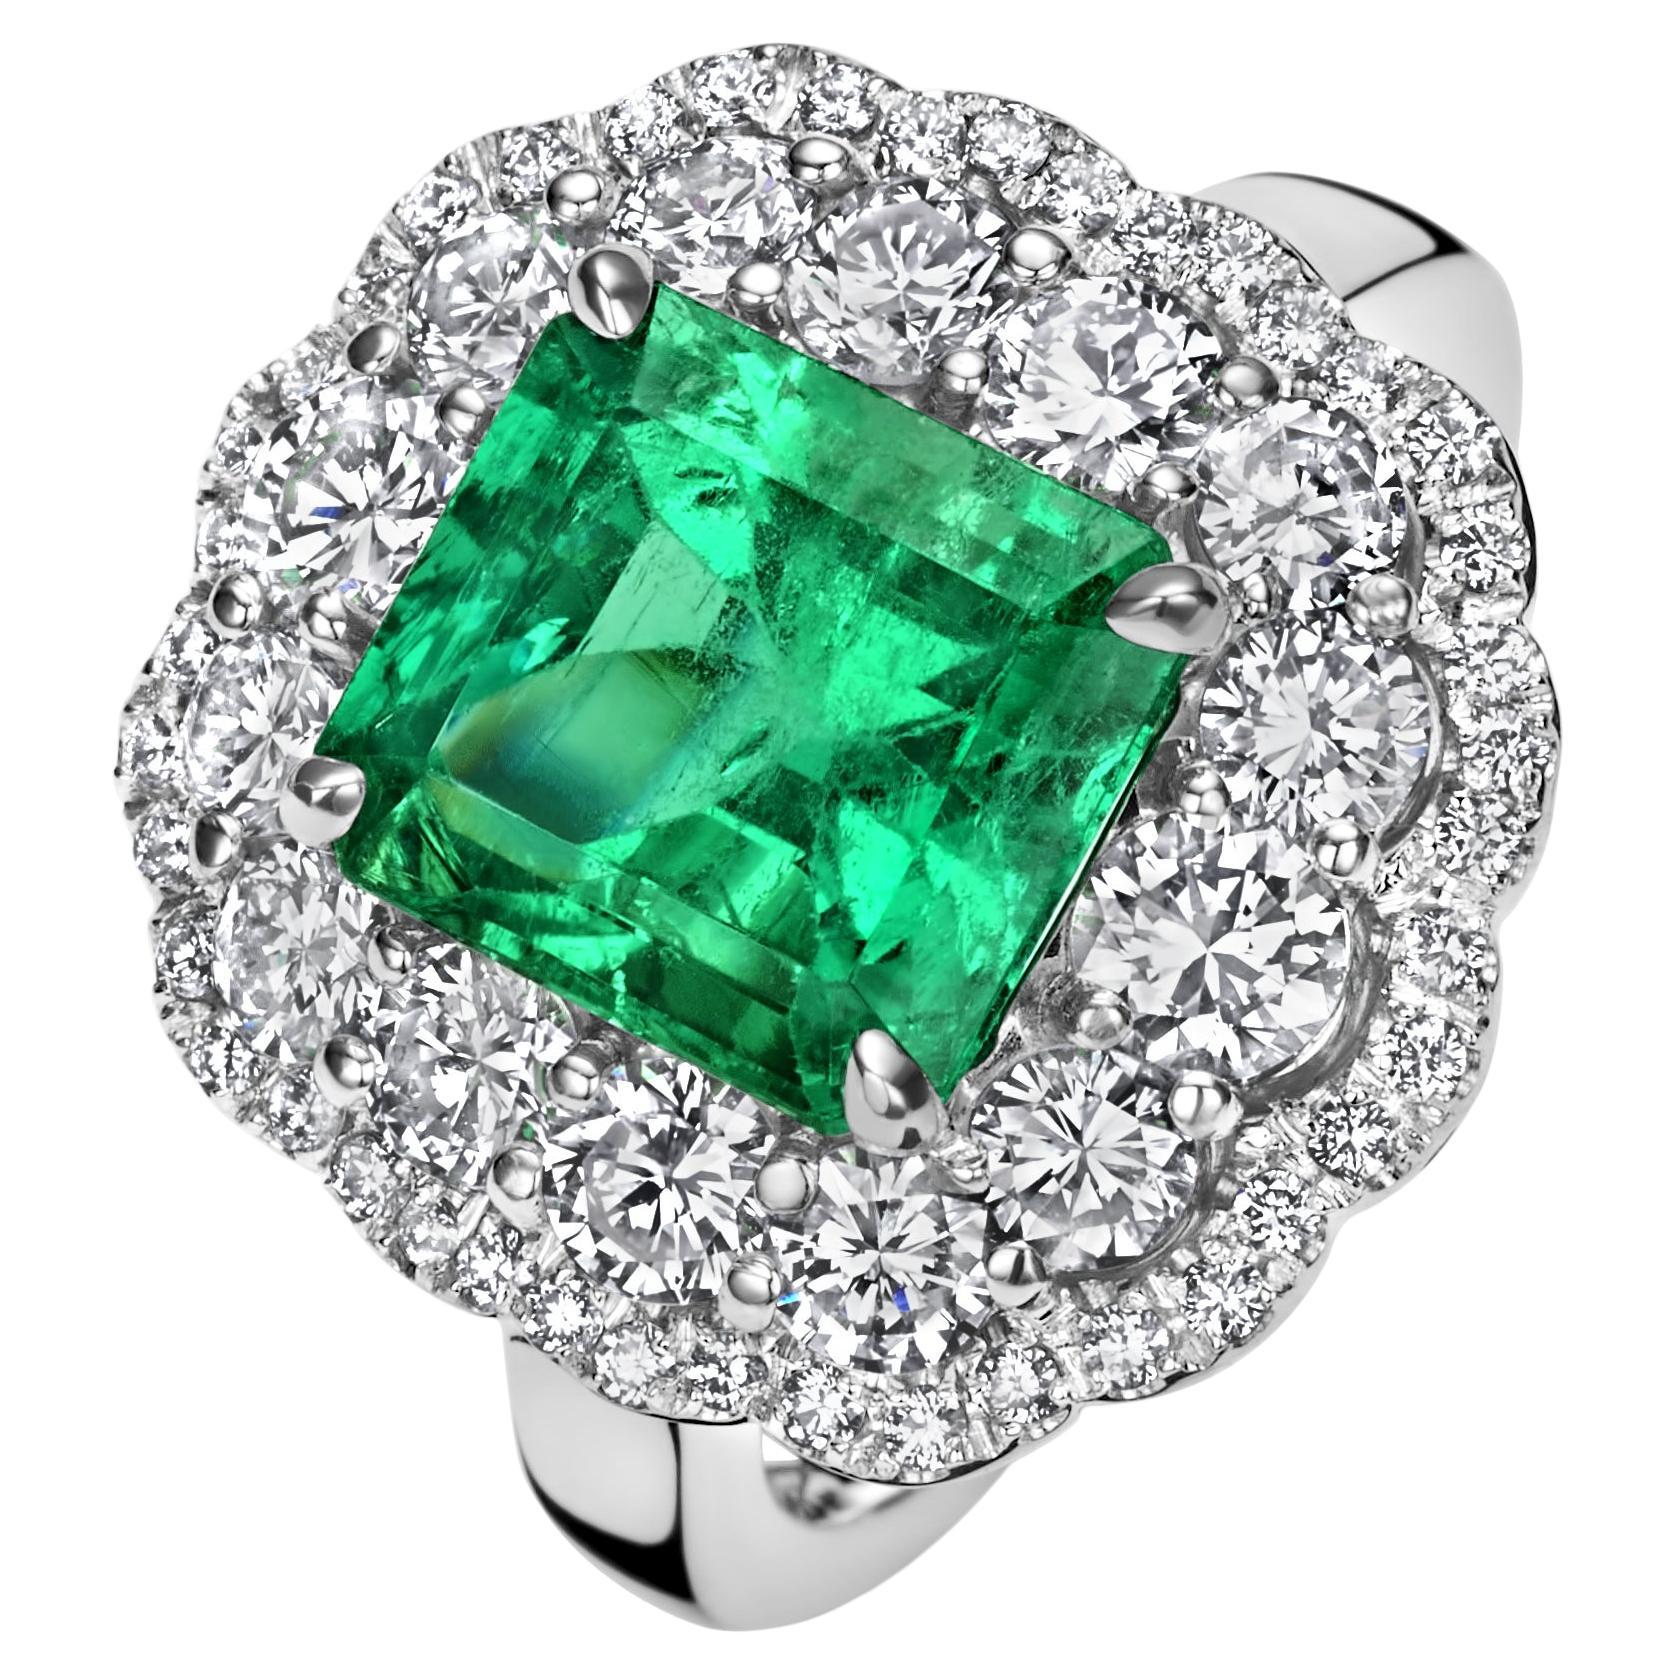 CGL Certified, 4.43 Ct Colombian Emerald Minor Oil, Diamond Ring 18 kt Whit Gol For Sale